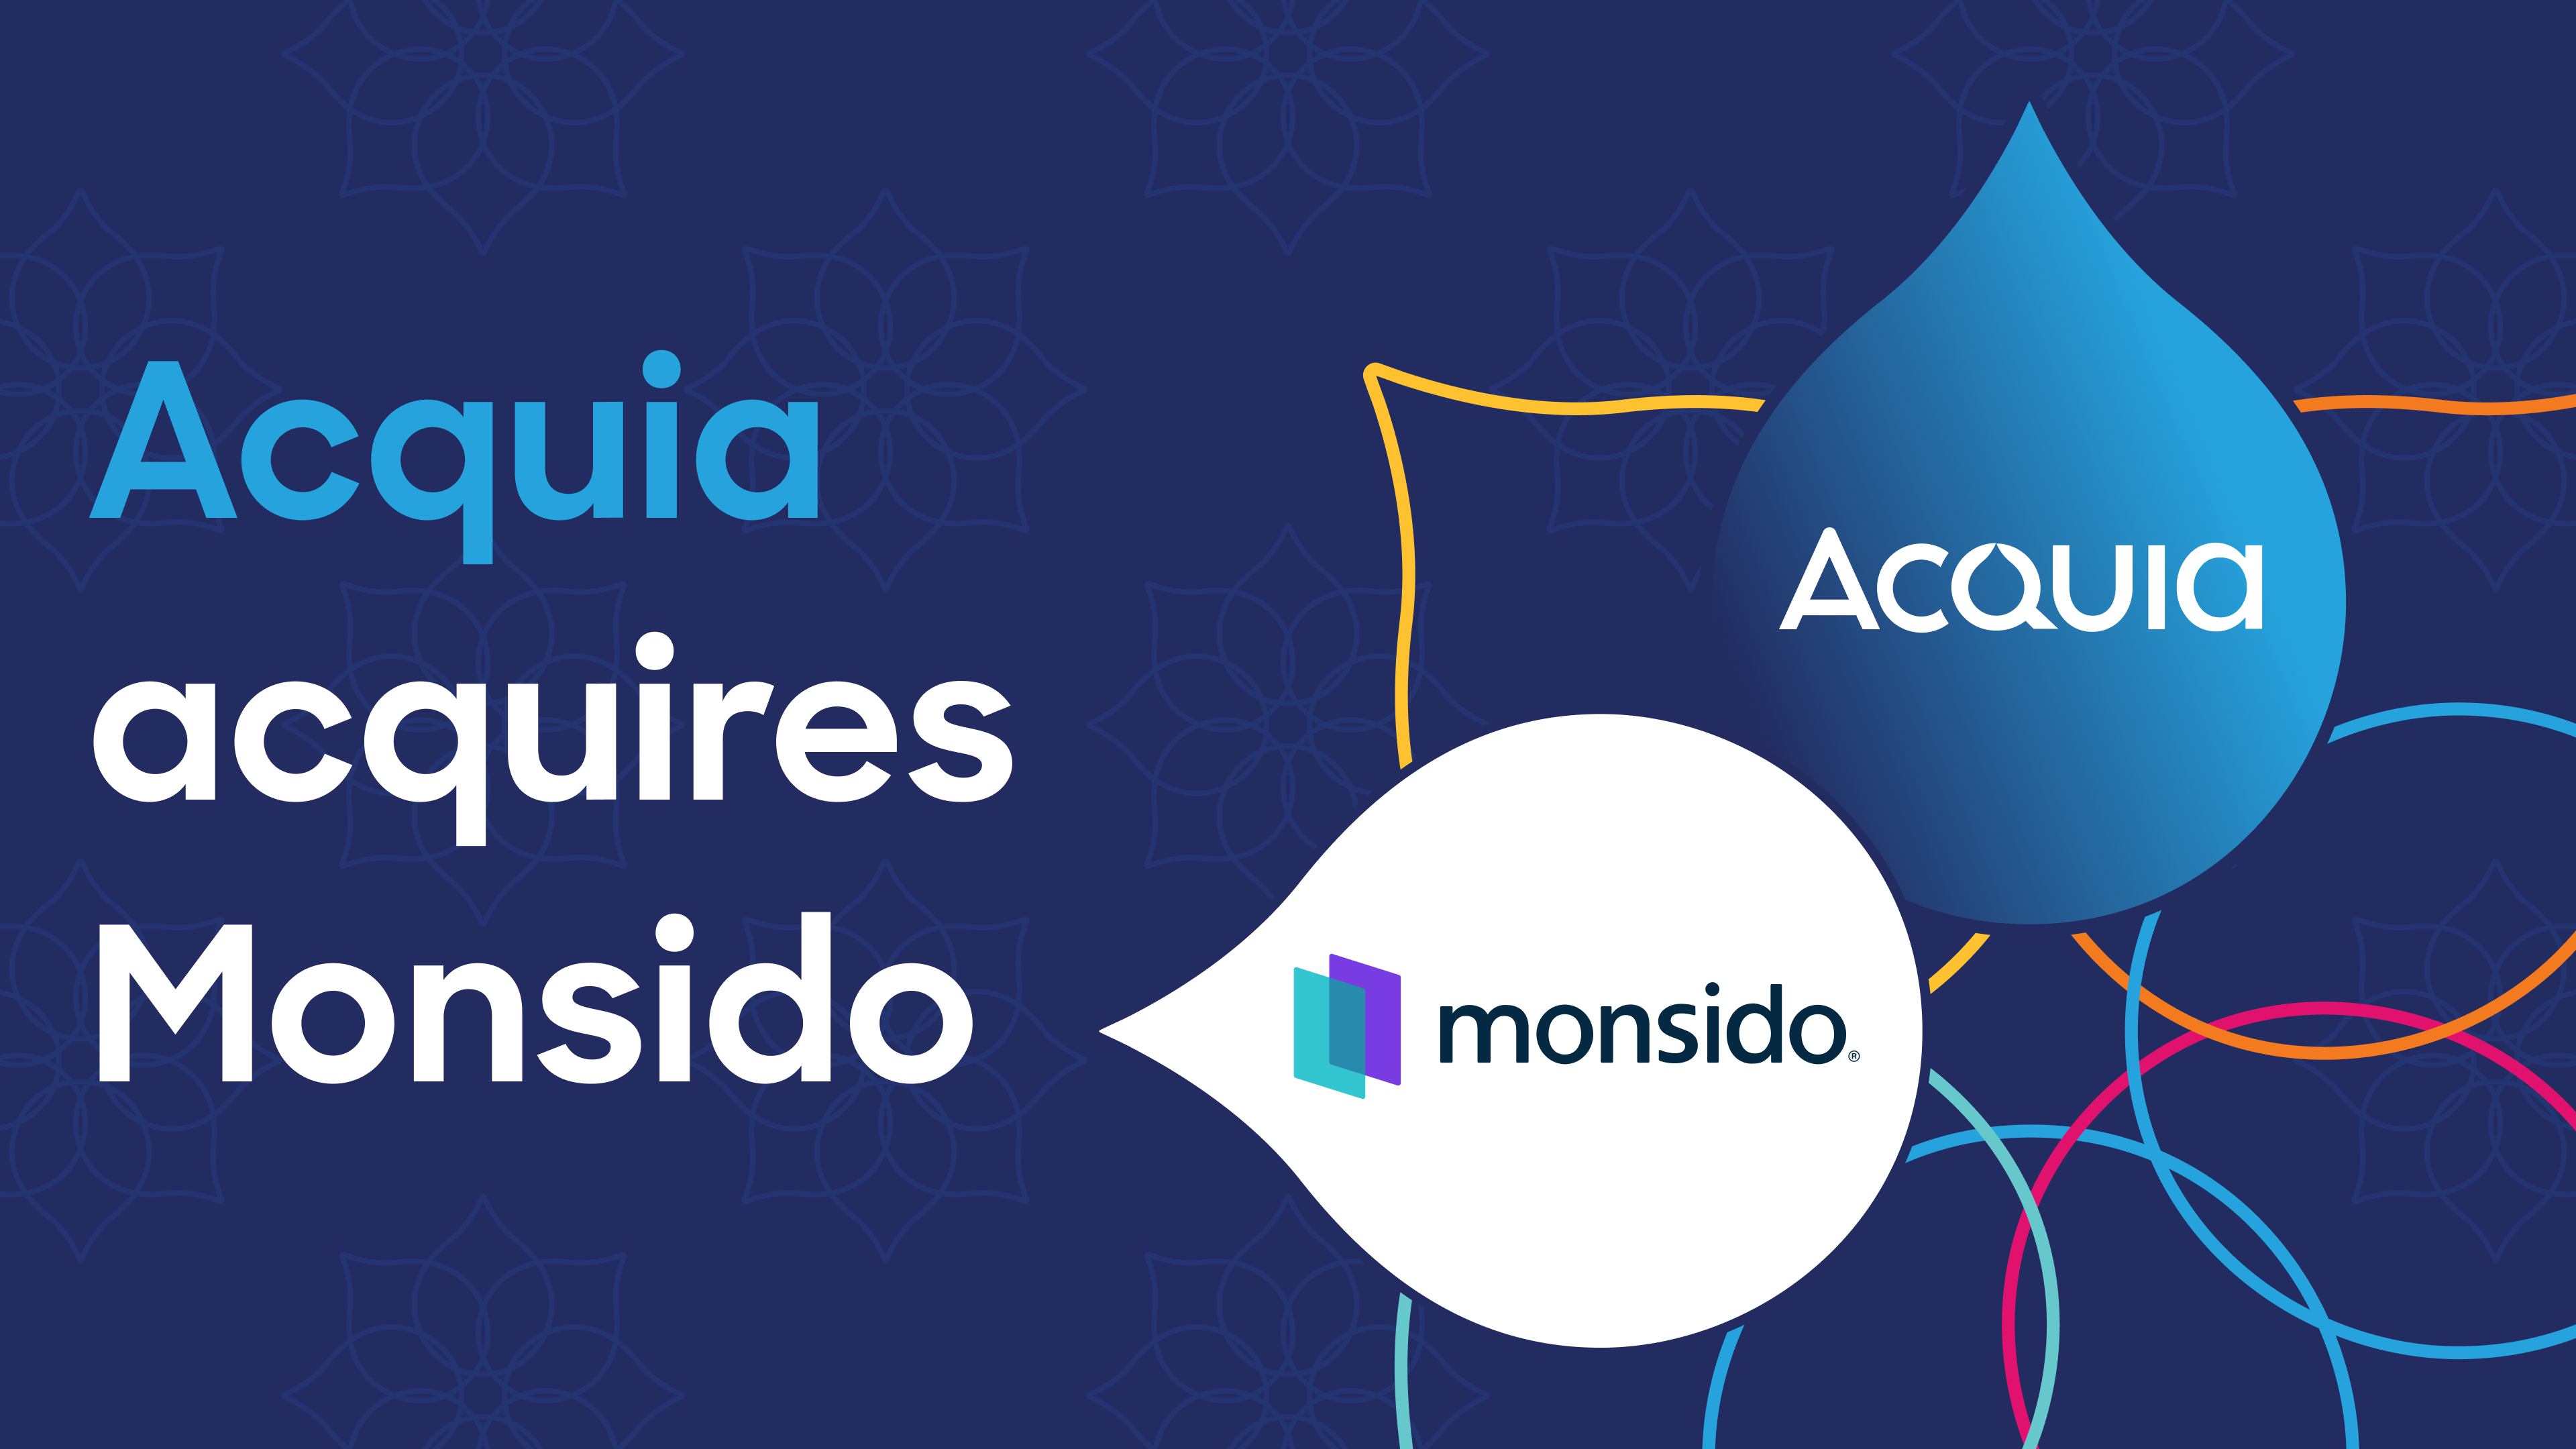 Logo of Acquia and Monsido with the tagline "Acquia to acquire Monsido".